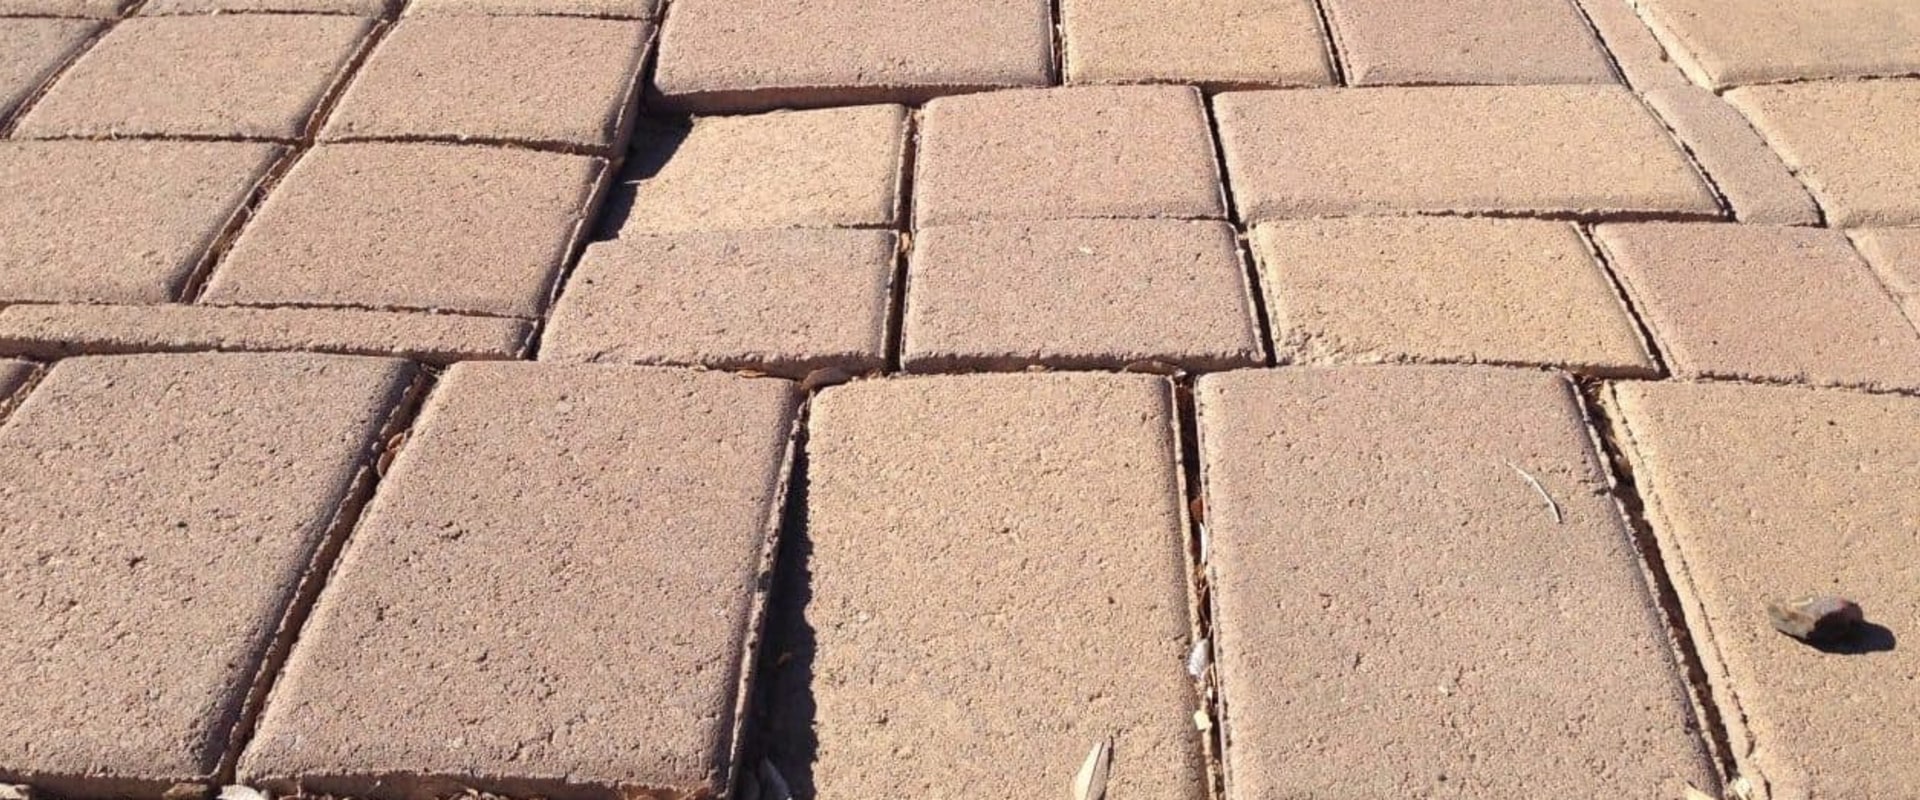 Can Pavers Be Repaired Without Removing Them? - An Expert's Guide